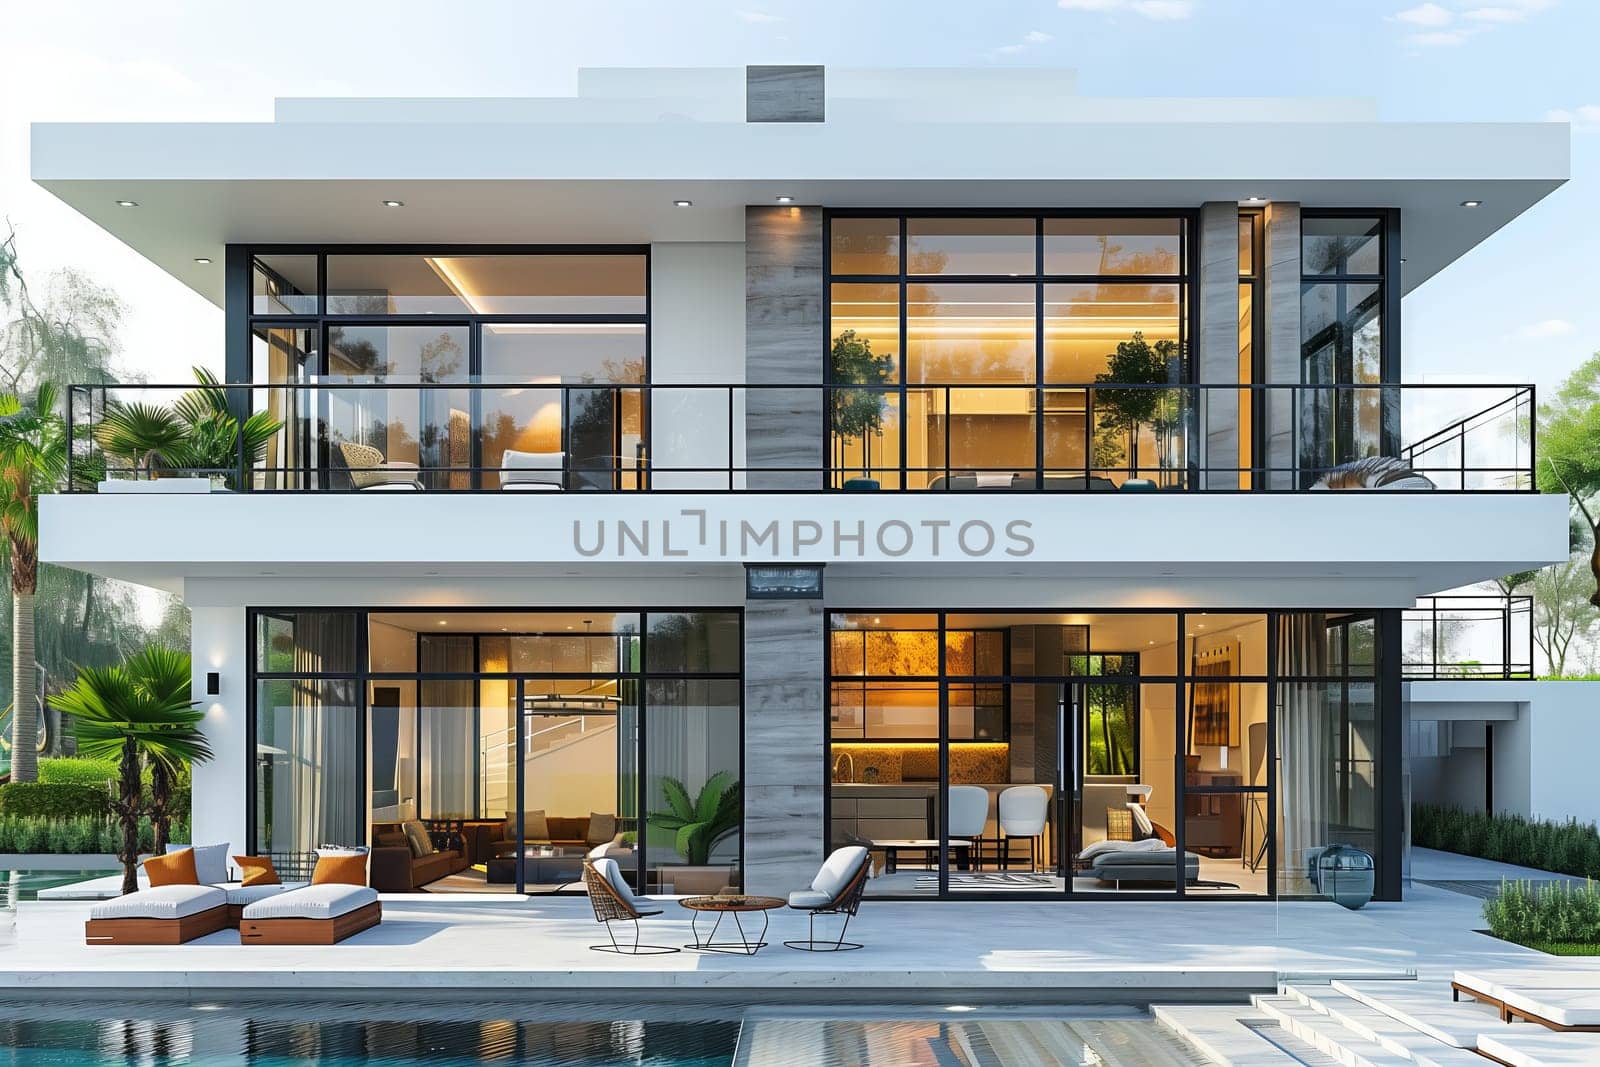 A contemporary building with a pool in front, featuring large windows, sleek design, and lush plants. This modern real estate boasts a stylish facade and highquality building materials